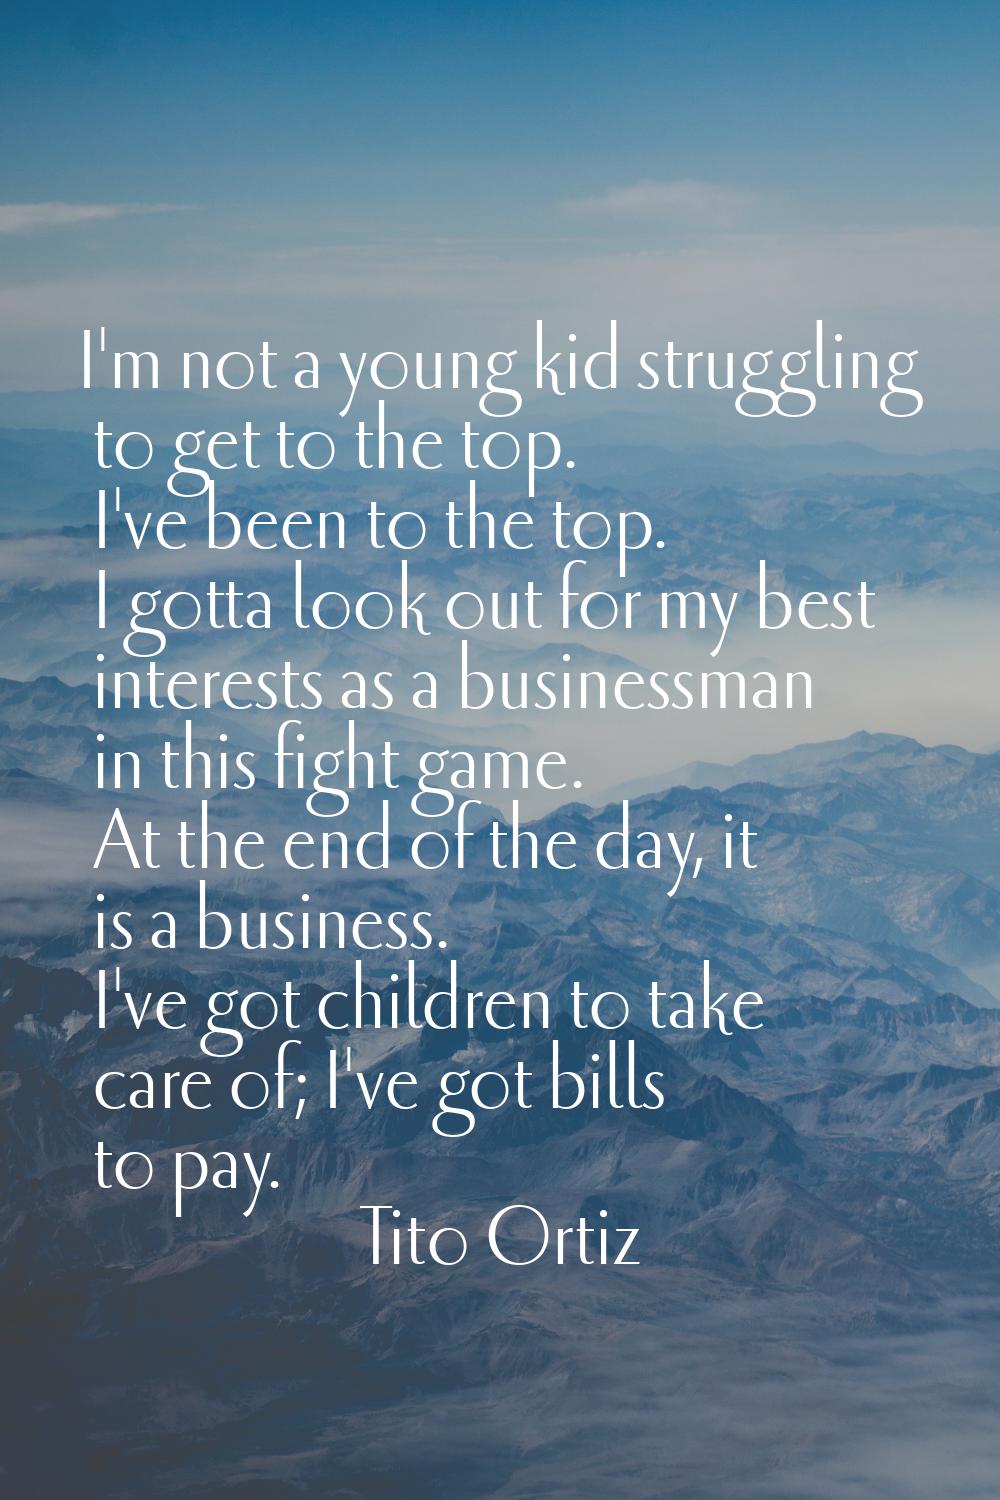 I'm not a young kid struggling to get to the top. I've been to the top. I gotta look out for my bes